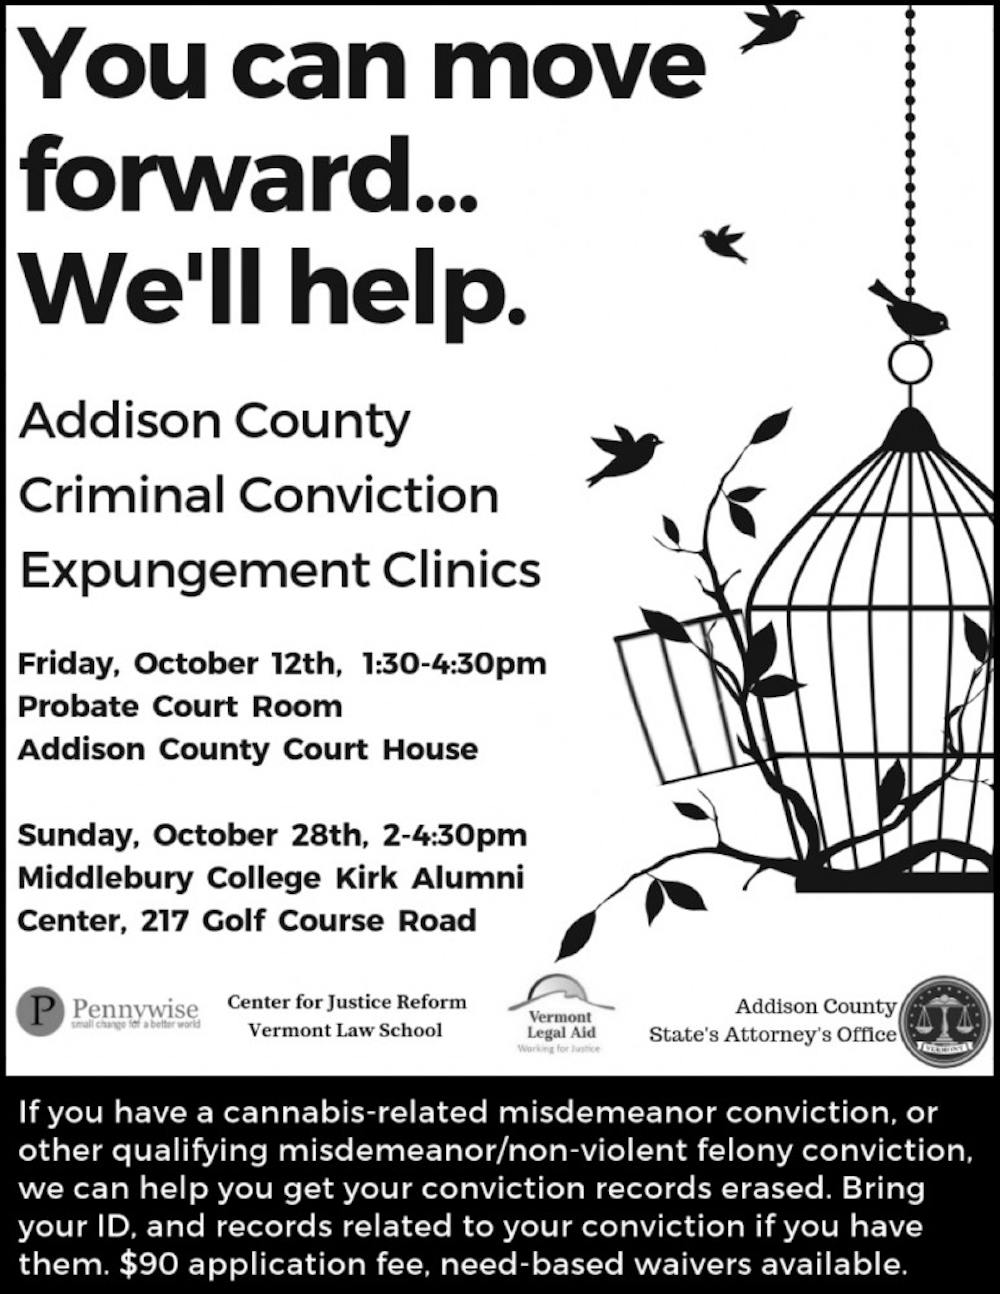 <span class="photocreditinline">PRESS RELEASE PHOTO</span><br />A flyer for the Addison County Expungement Clinics.